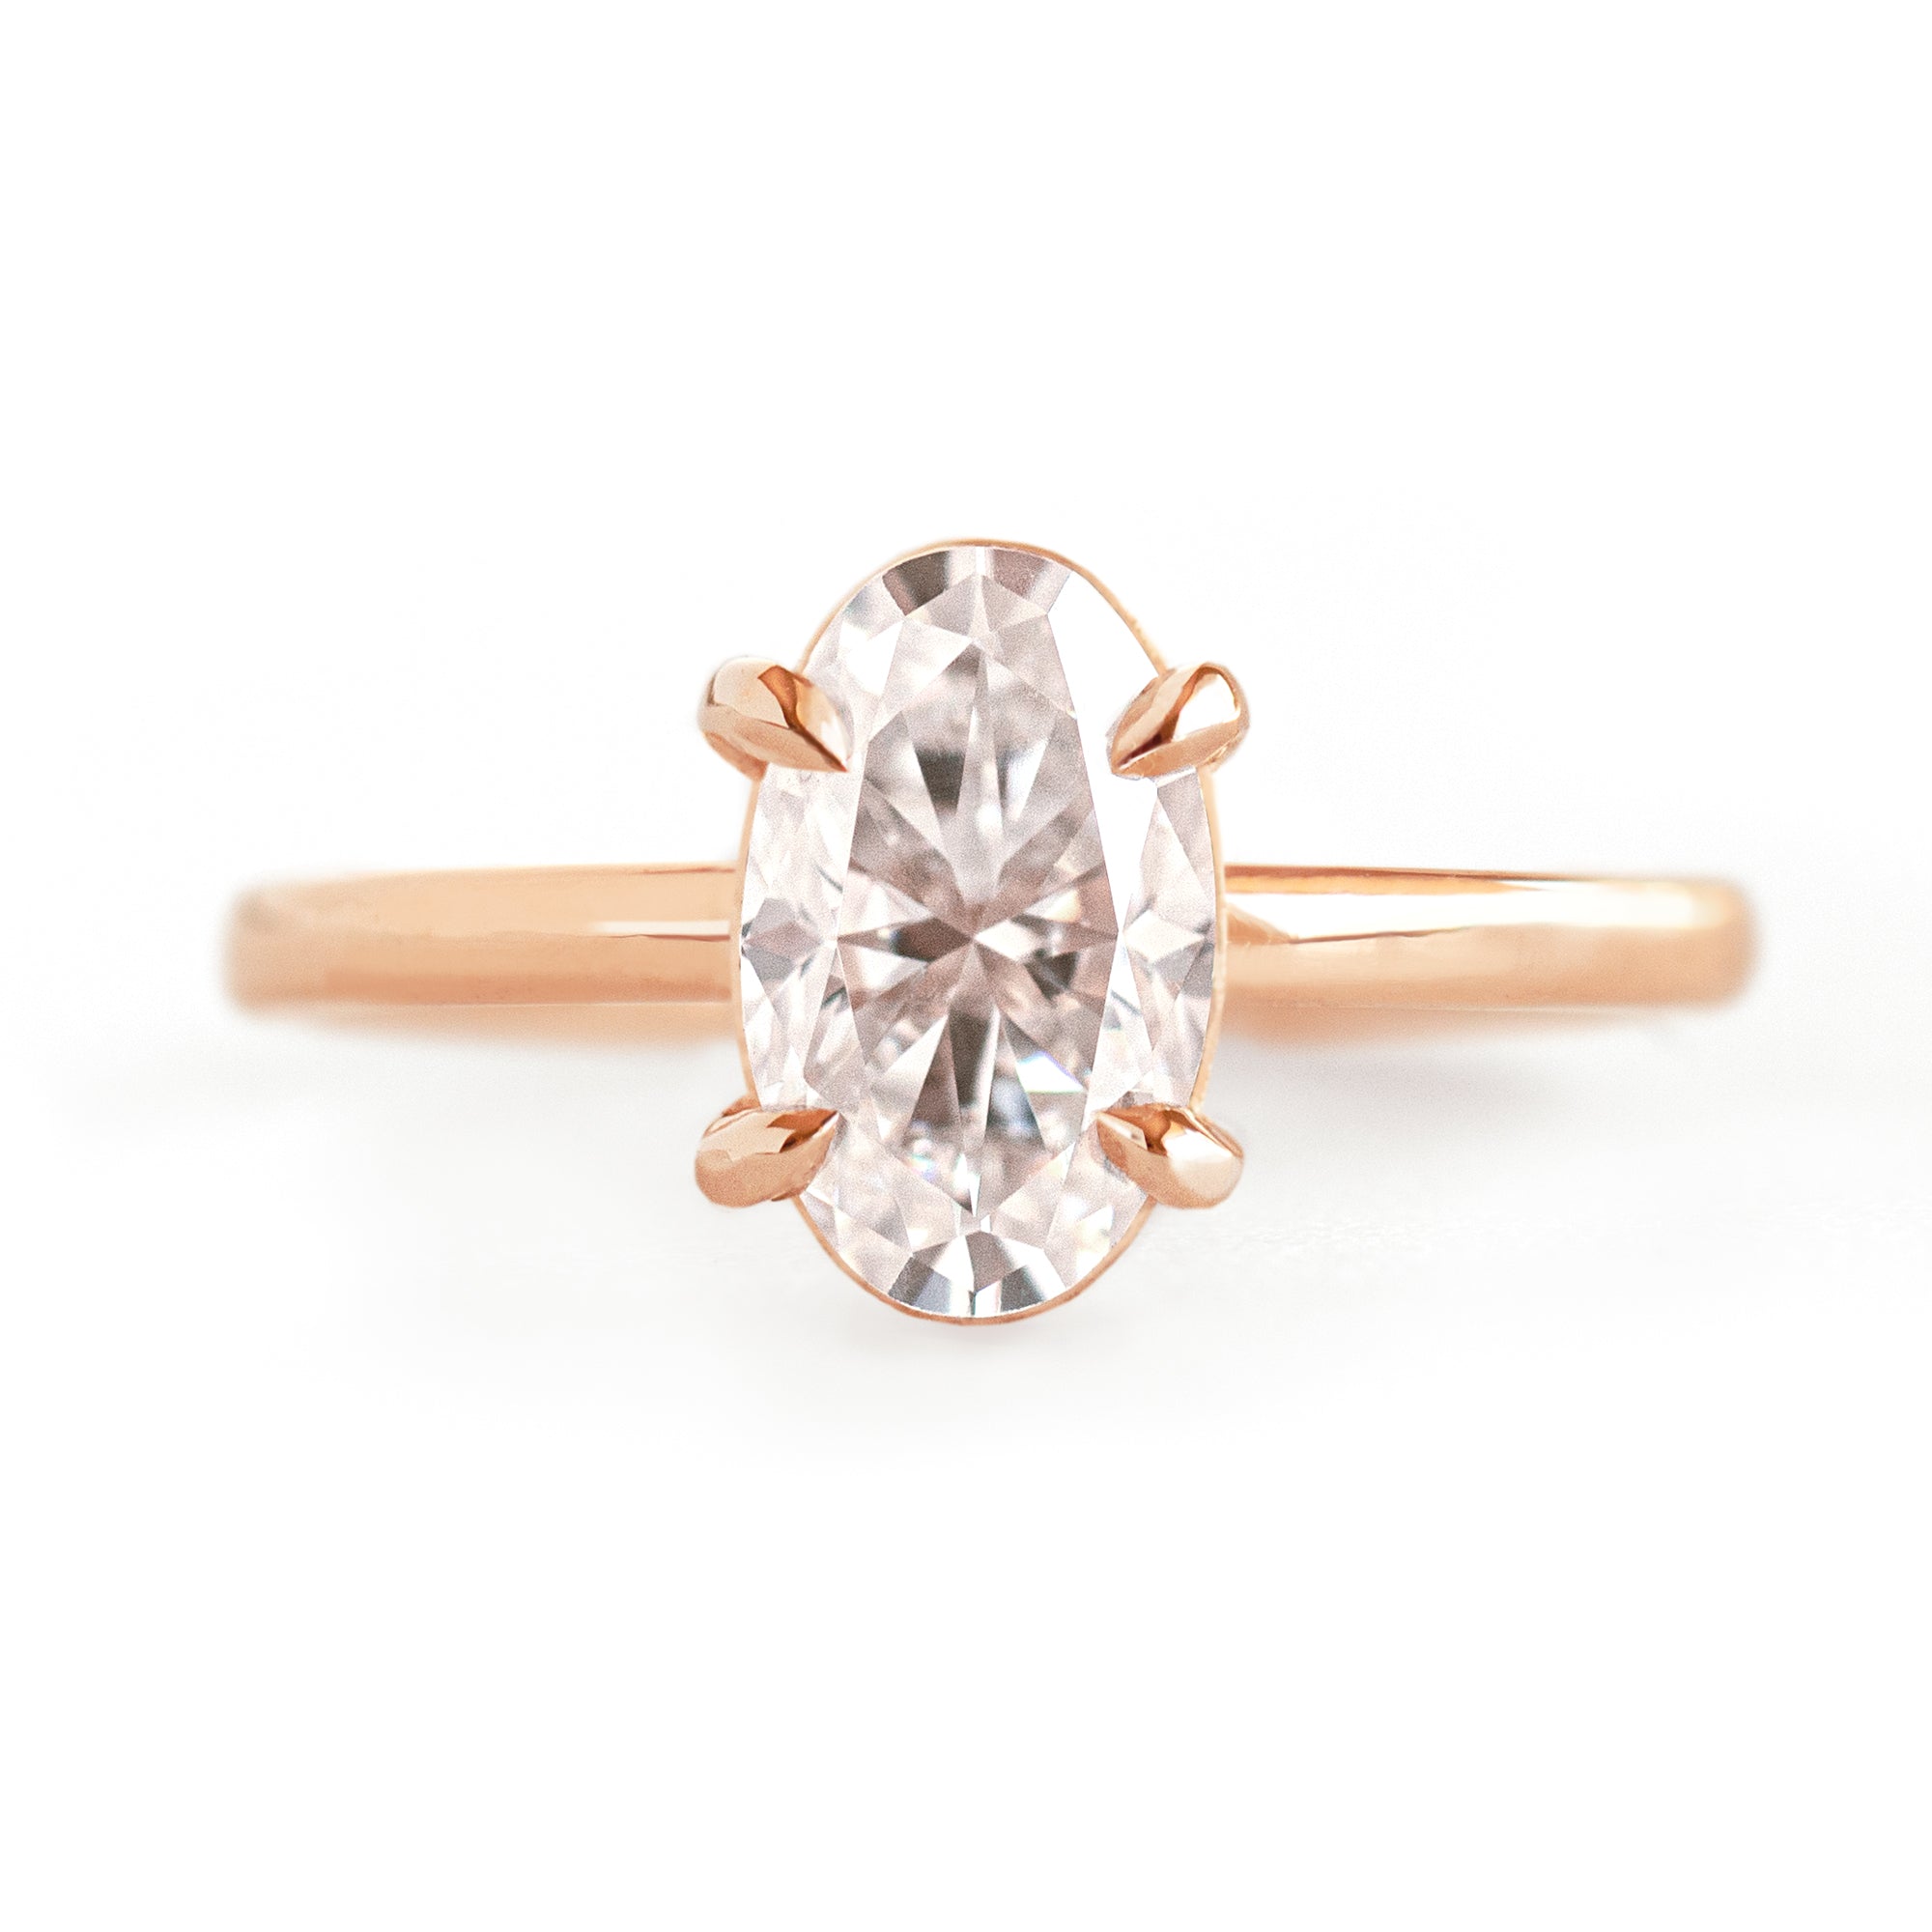 Jamie Park Jewelry -Magnolia 2 ct. Elongated Oval Moissanite Ring